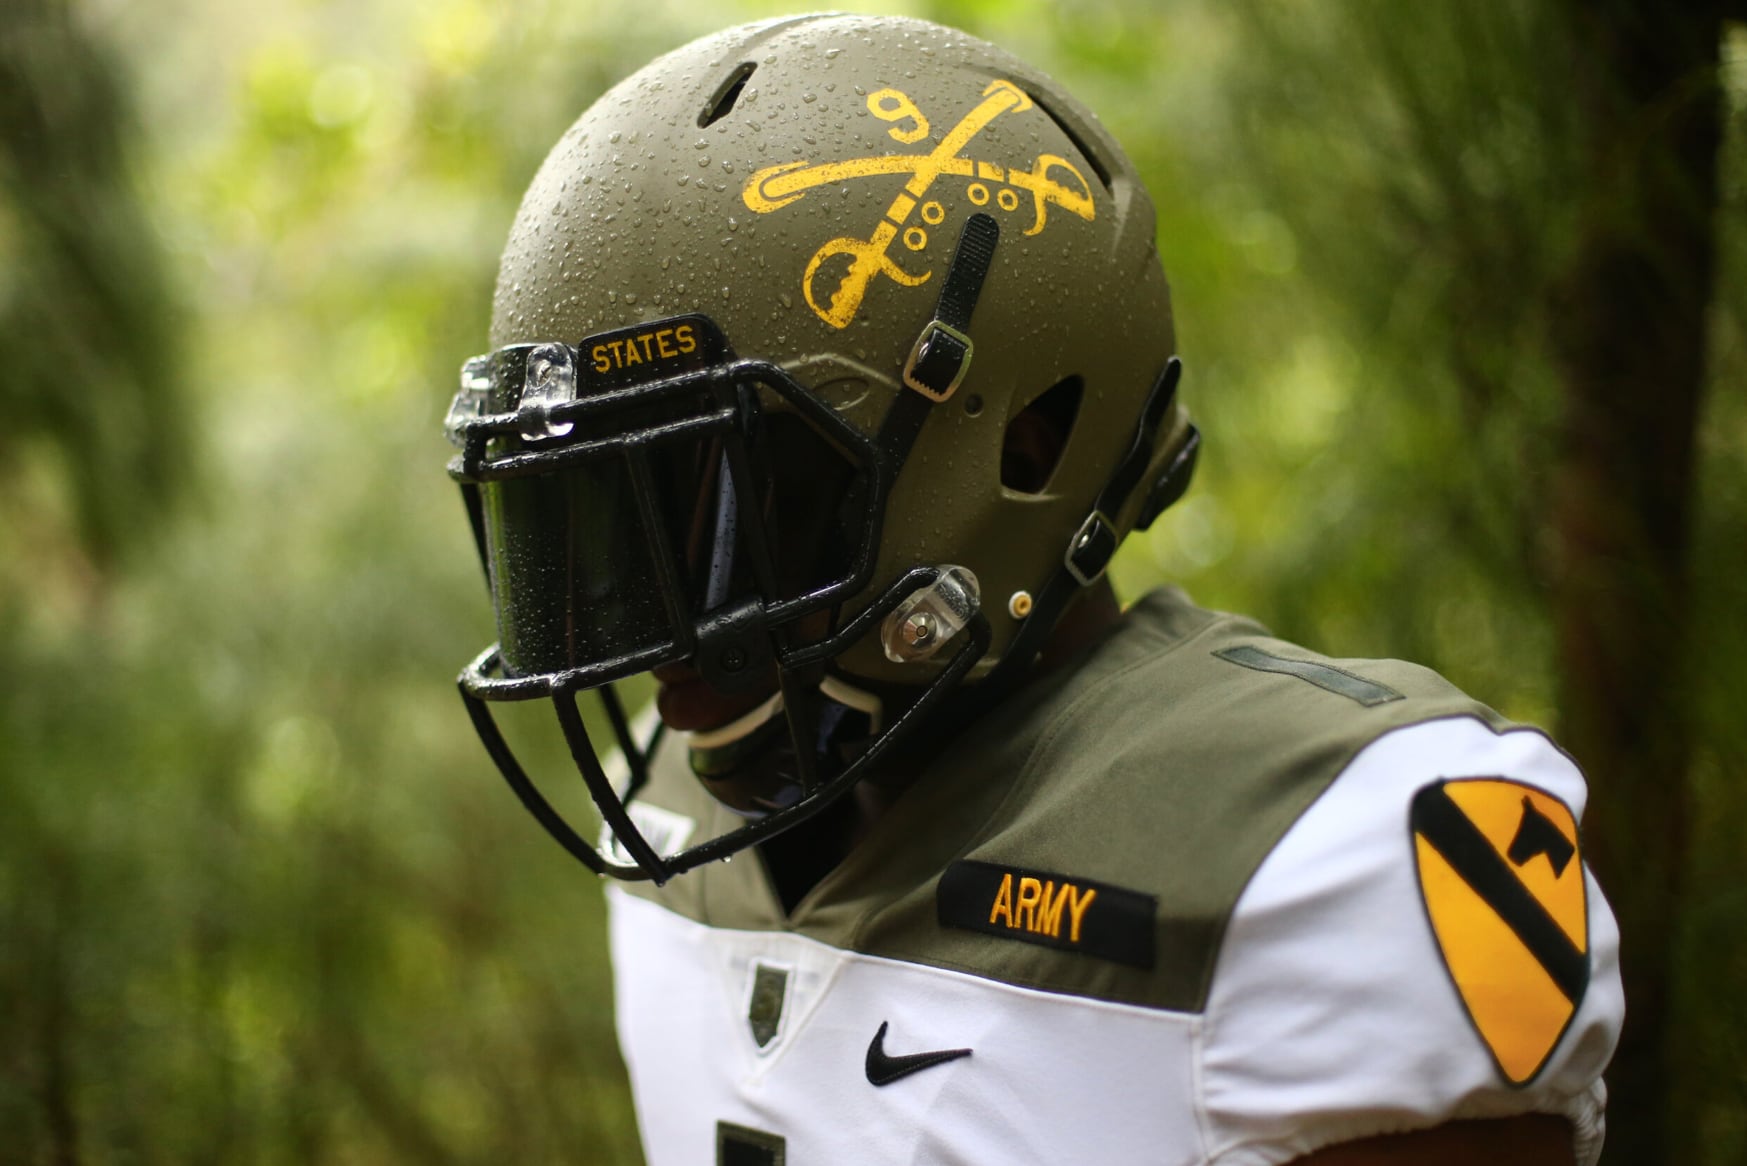 Army to honor 1st Cavalry Division with new unis against rival Navy. 